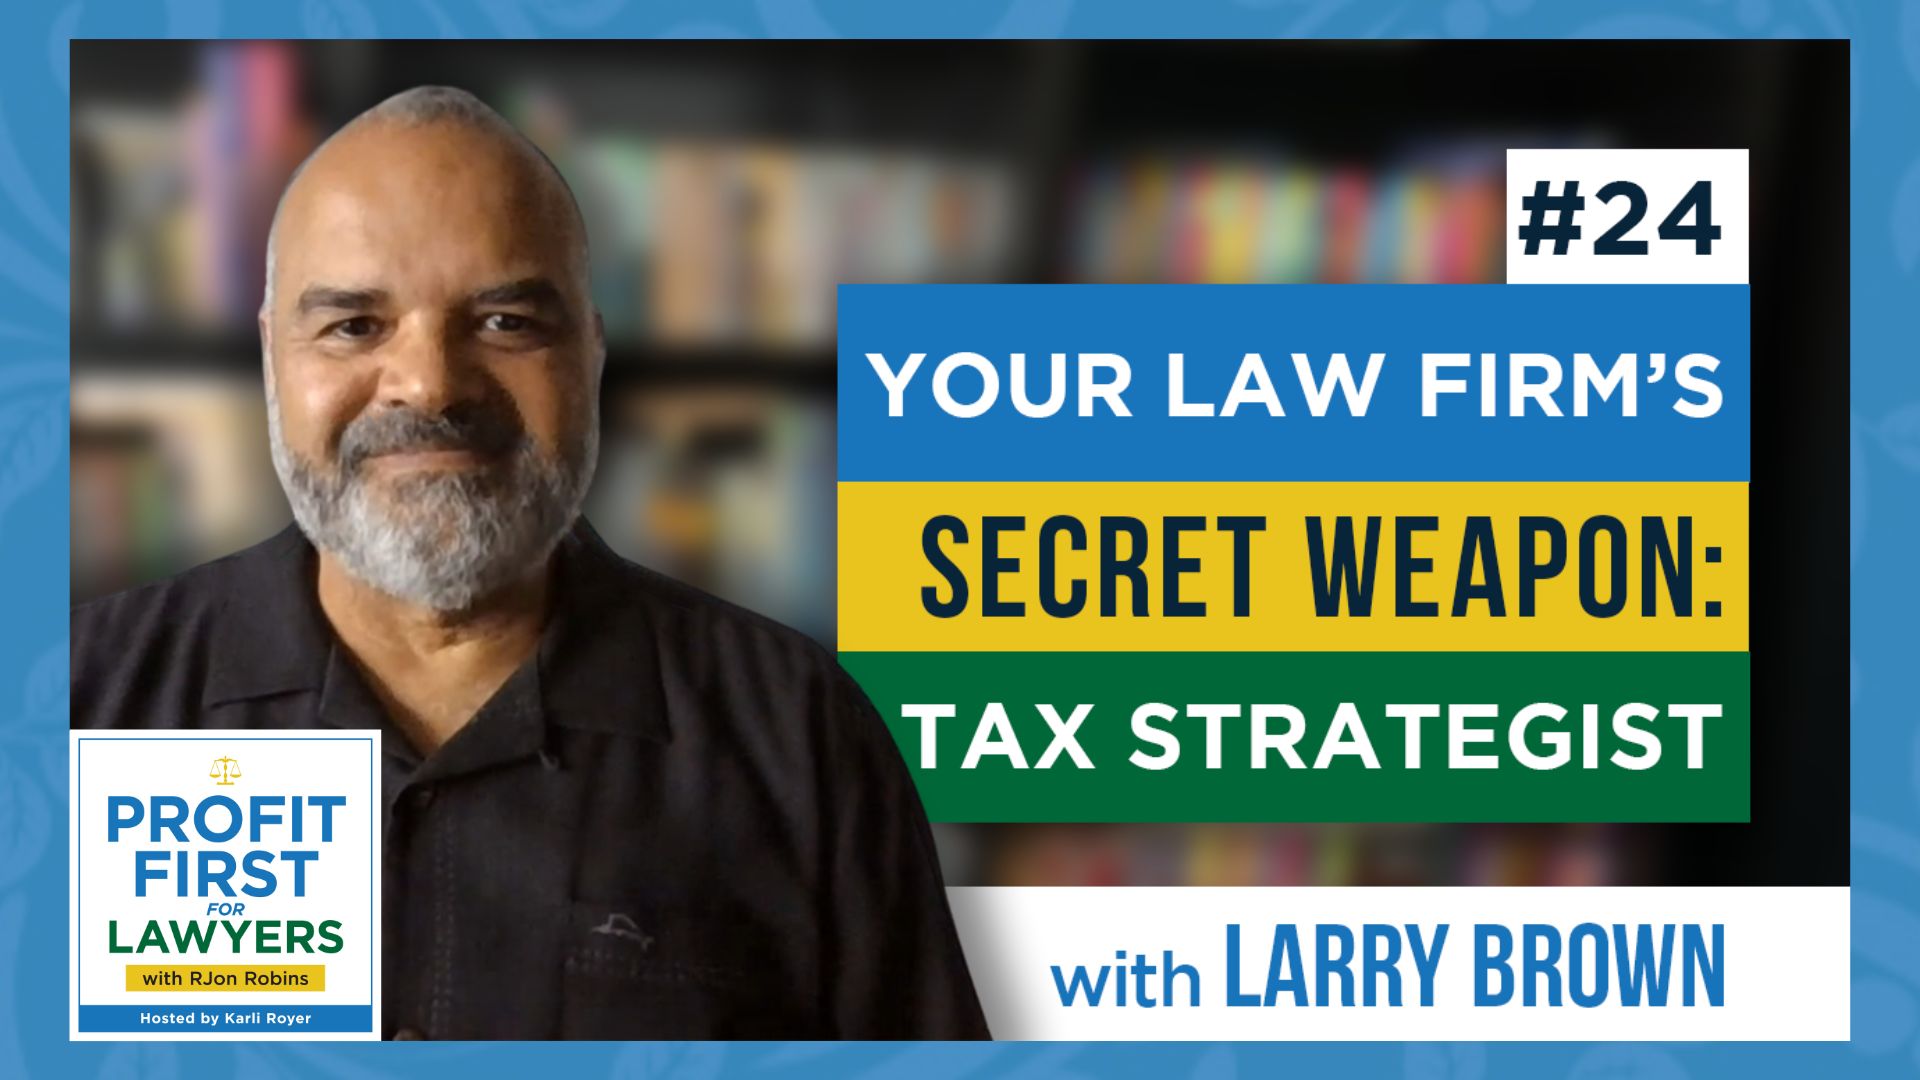 Featured Image for episode 24 "Your Law Firm's Secret Weapon: Tax Strategist" Pictured: Larry Brown, CPA & Tax Strategist for RJon Robins.